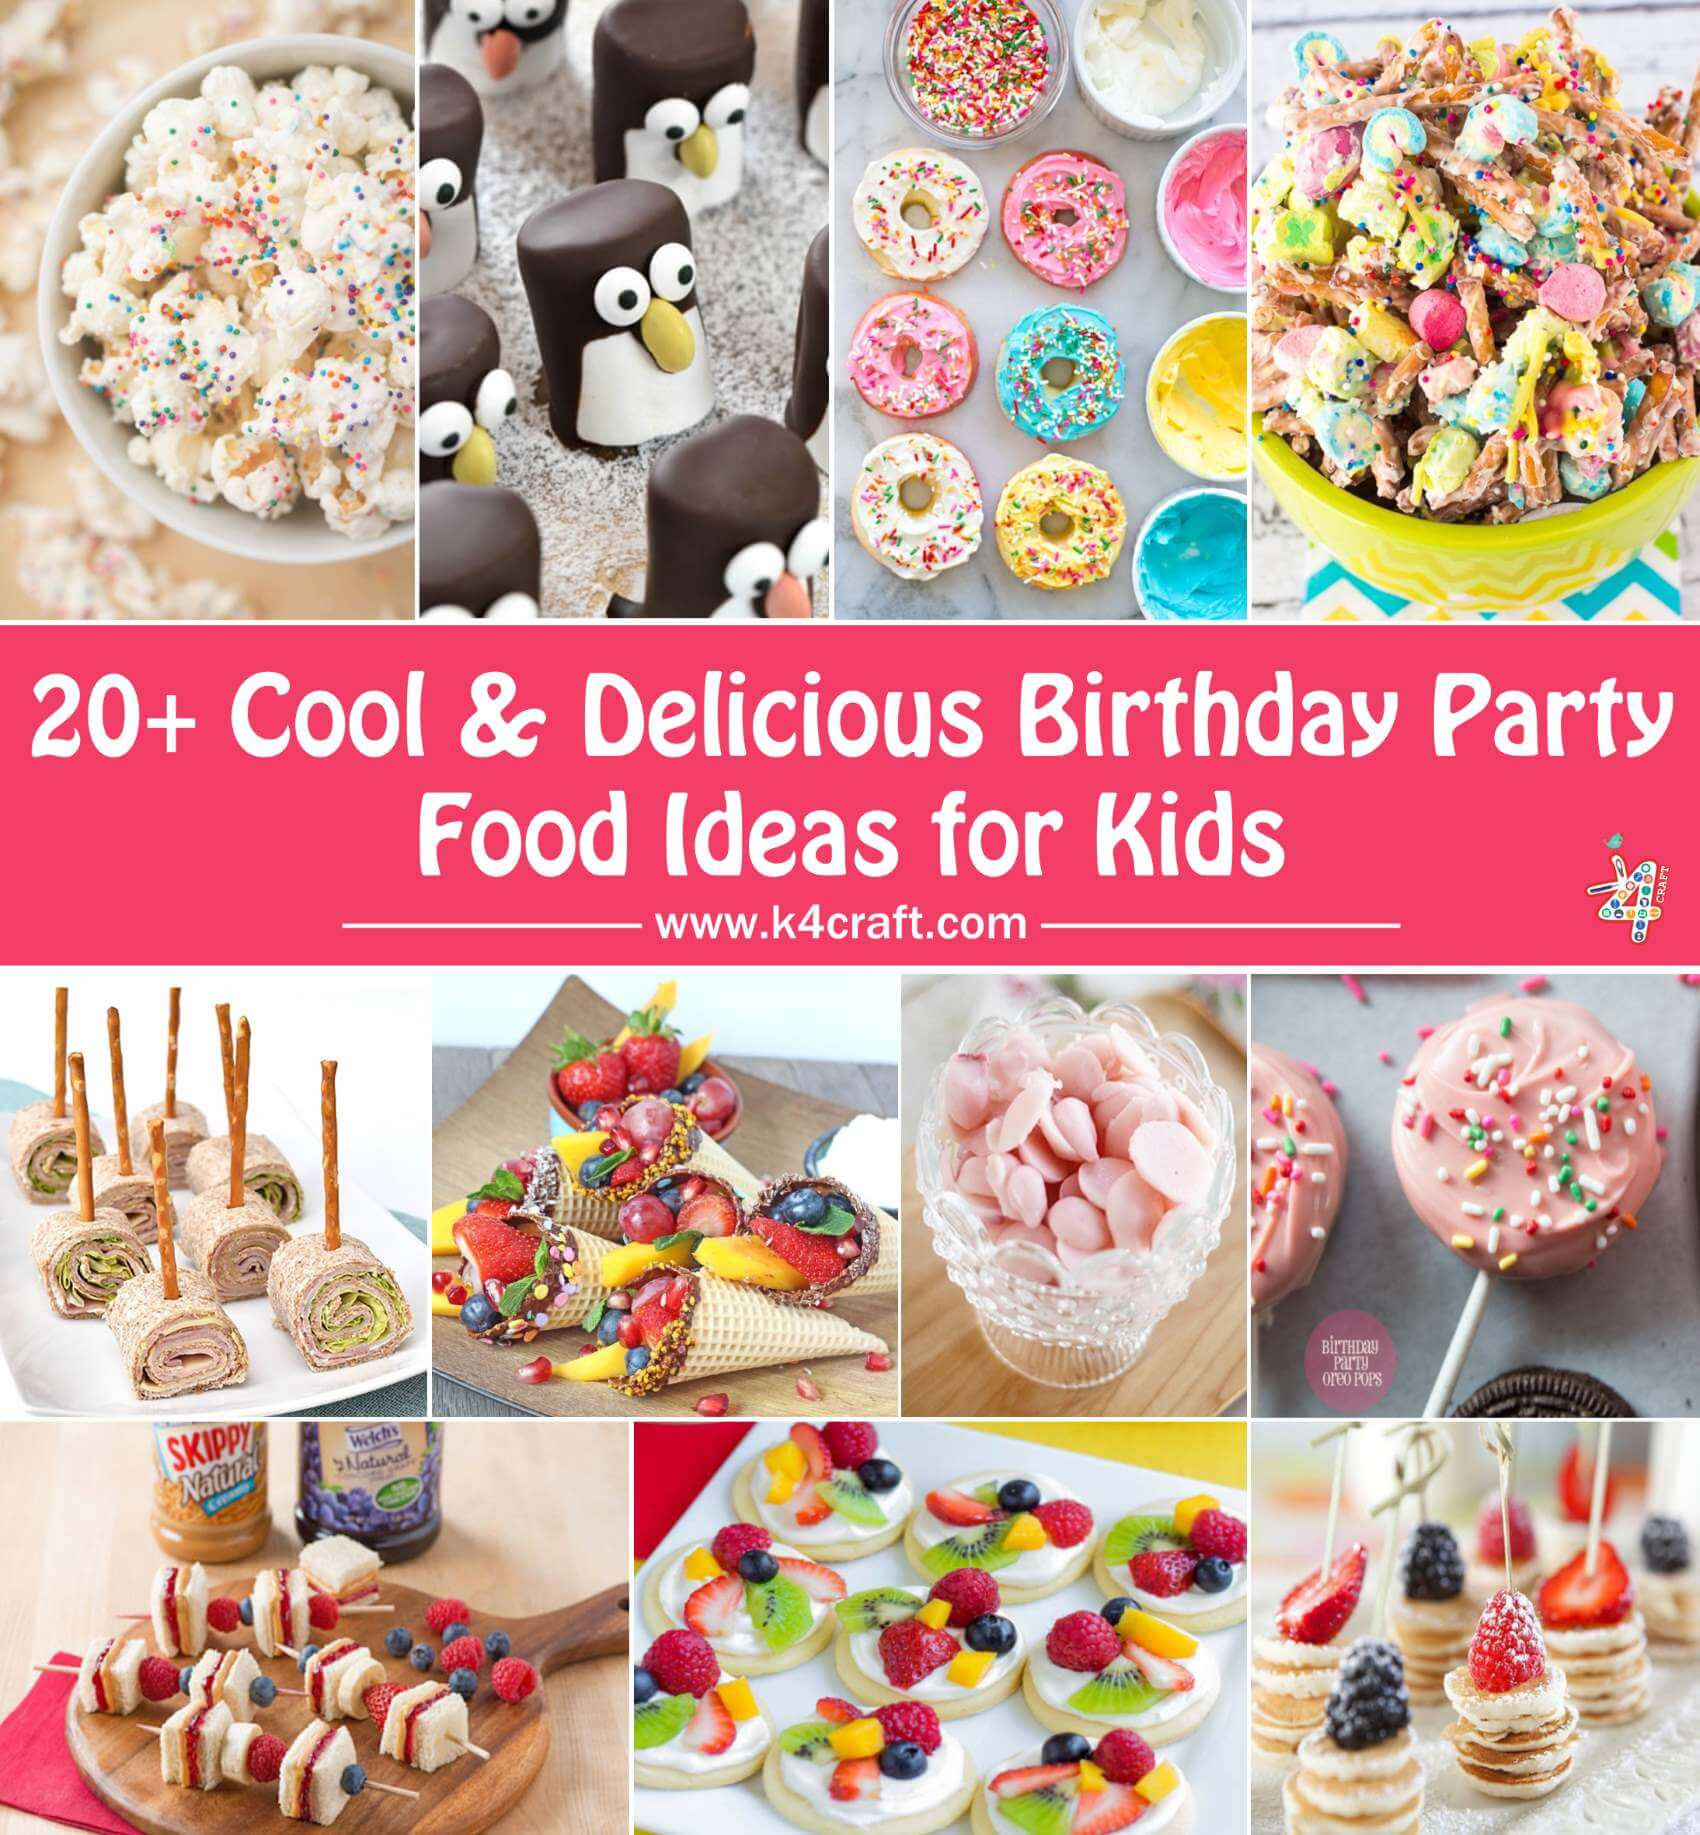 Party Food Ideas For Birthday
 Cool & Delicious Birthday Party Food Ideas for Kids K4 Craft